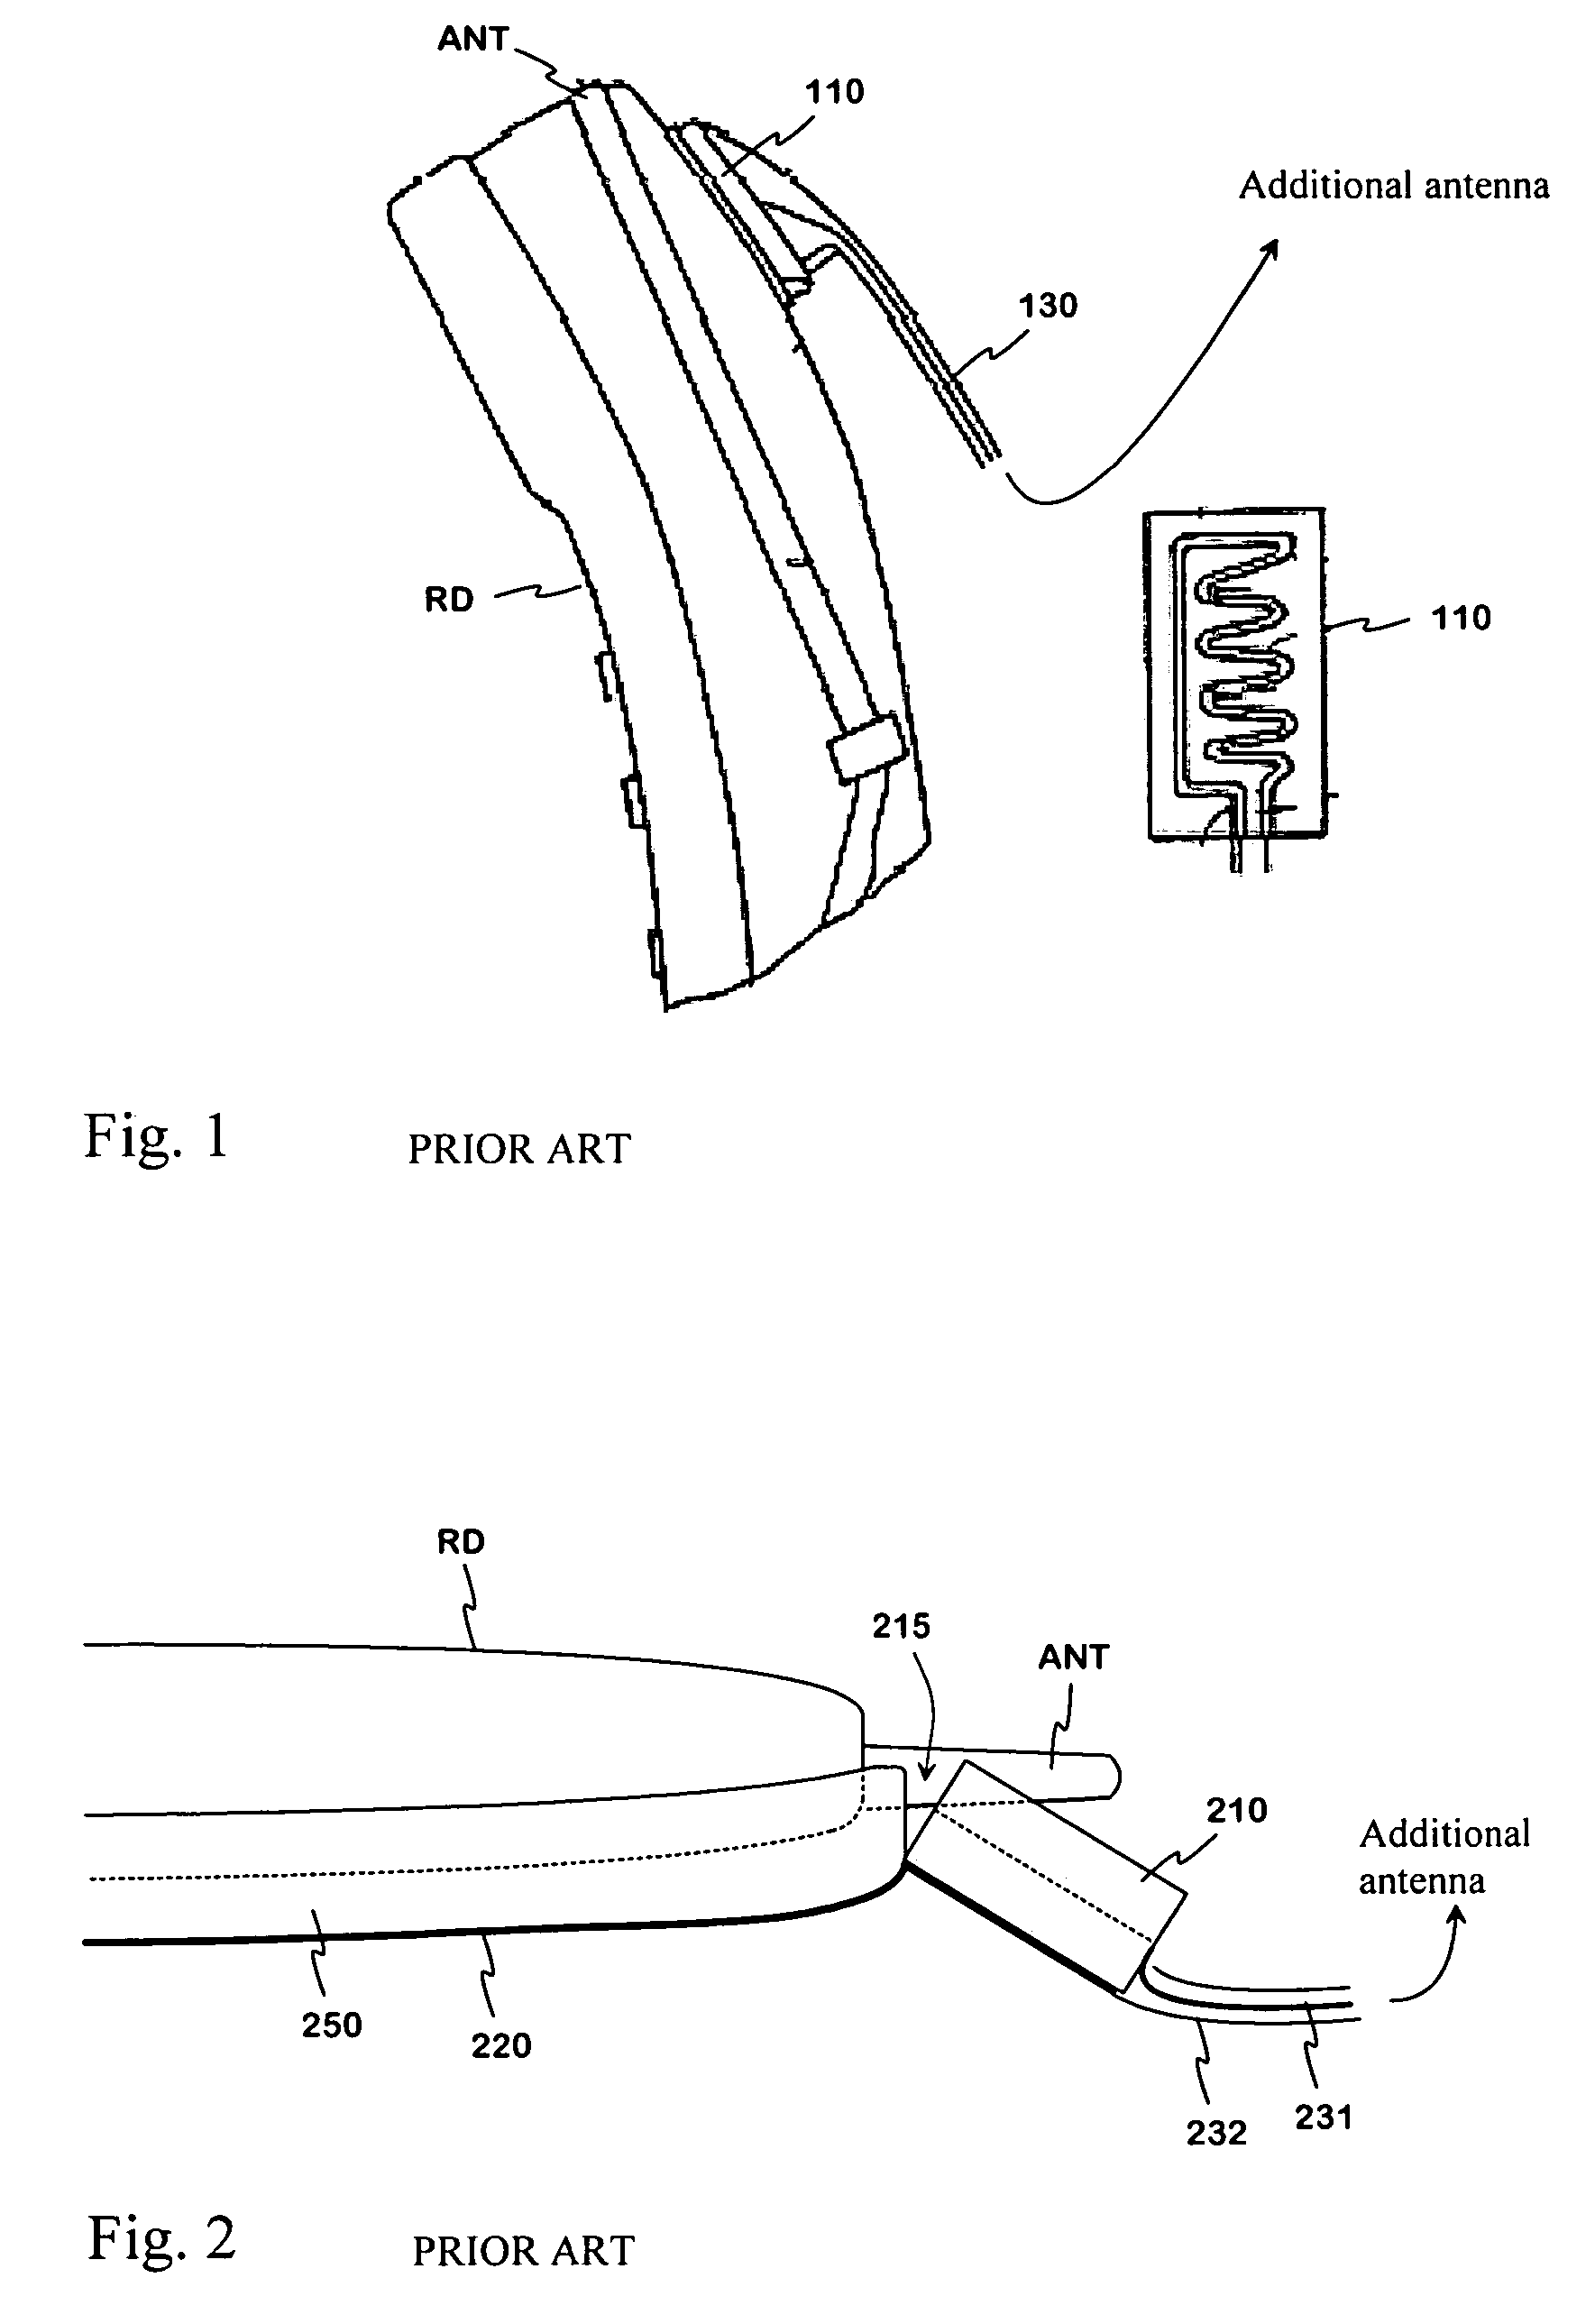 Arrangement for connecting additional antenna to radio device